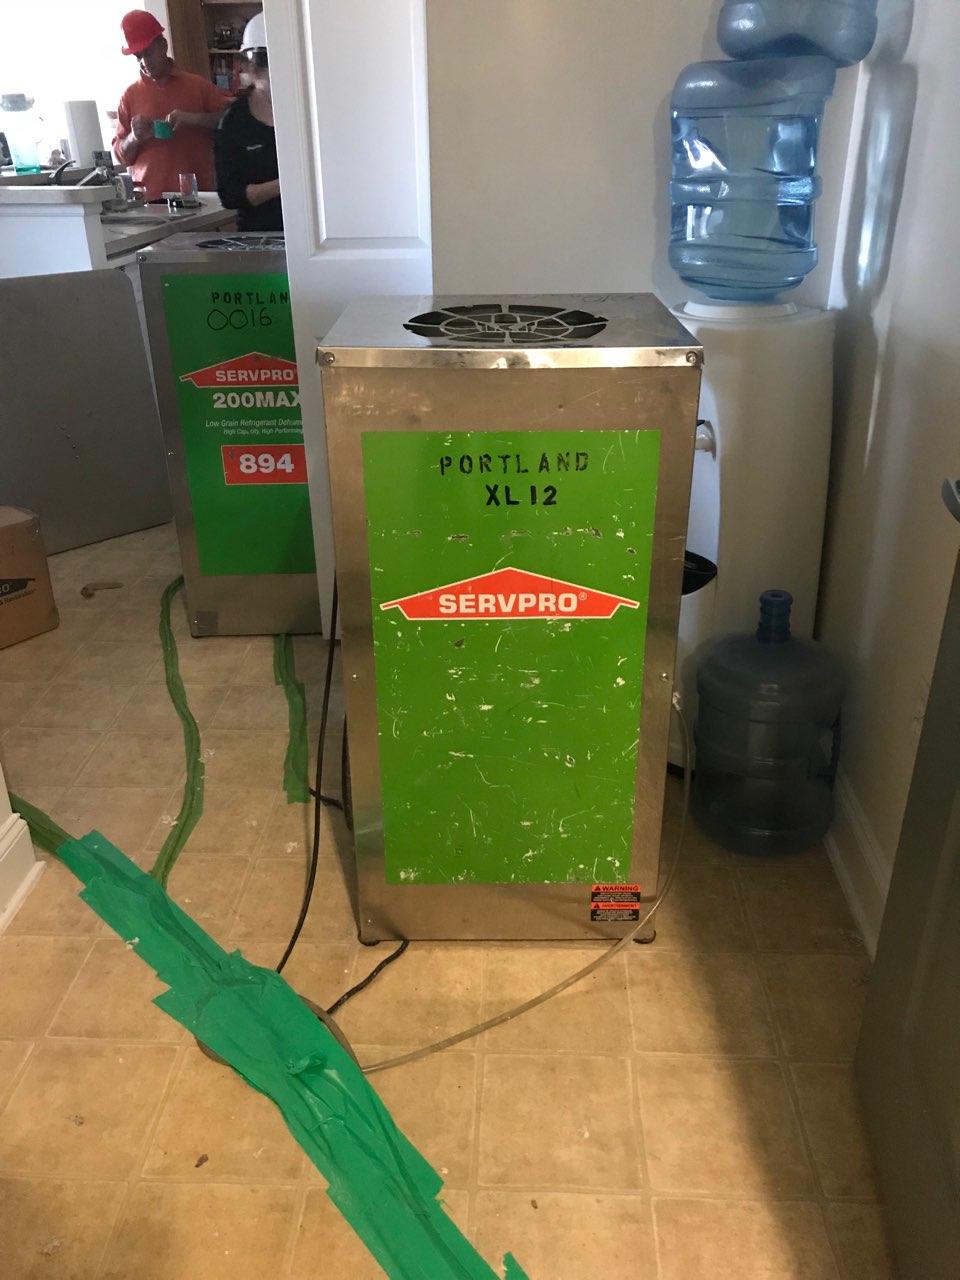 SERVPRO of Portland is Ready for whatever happens.